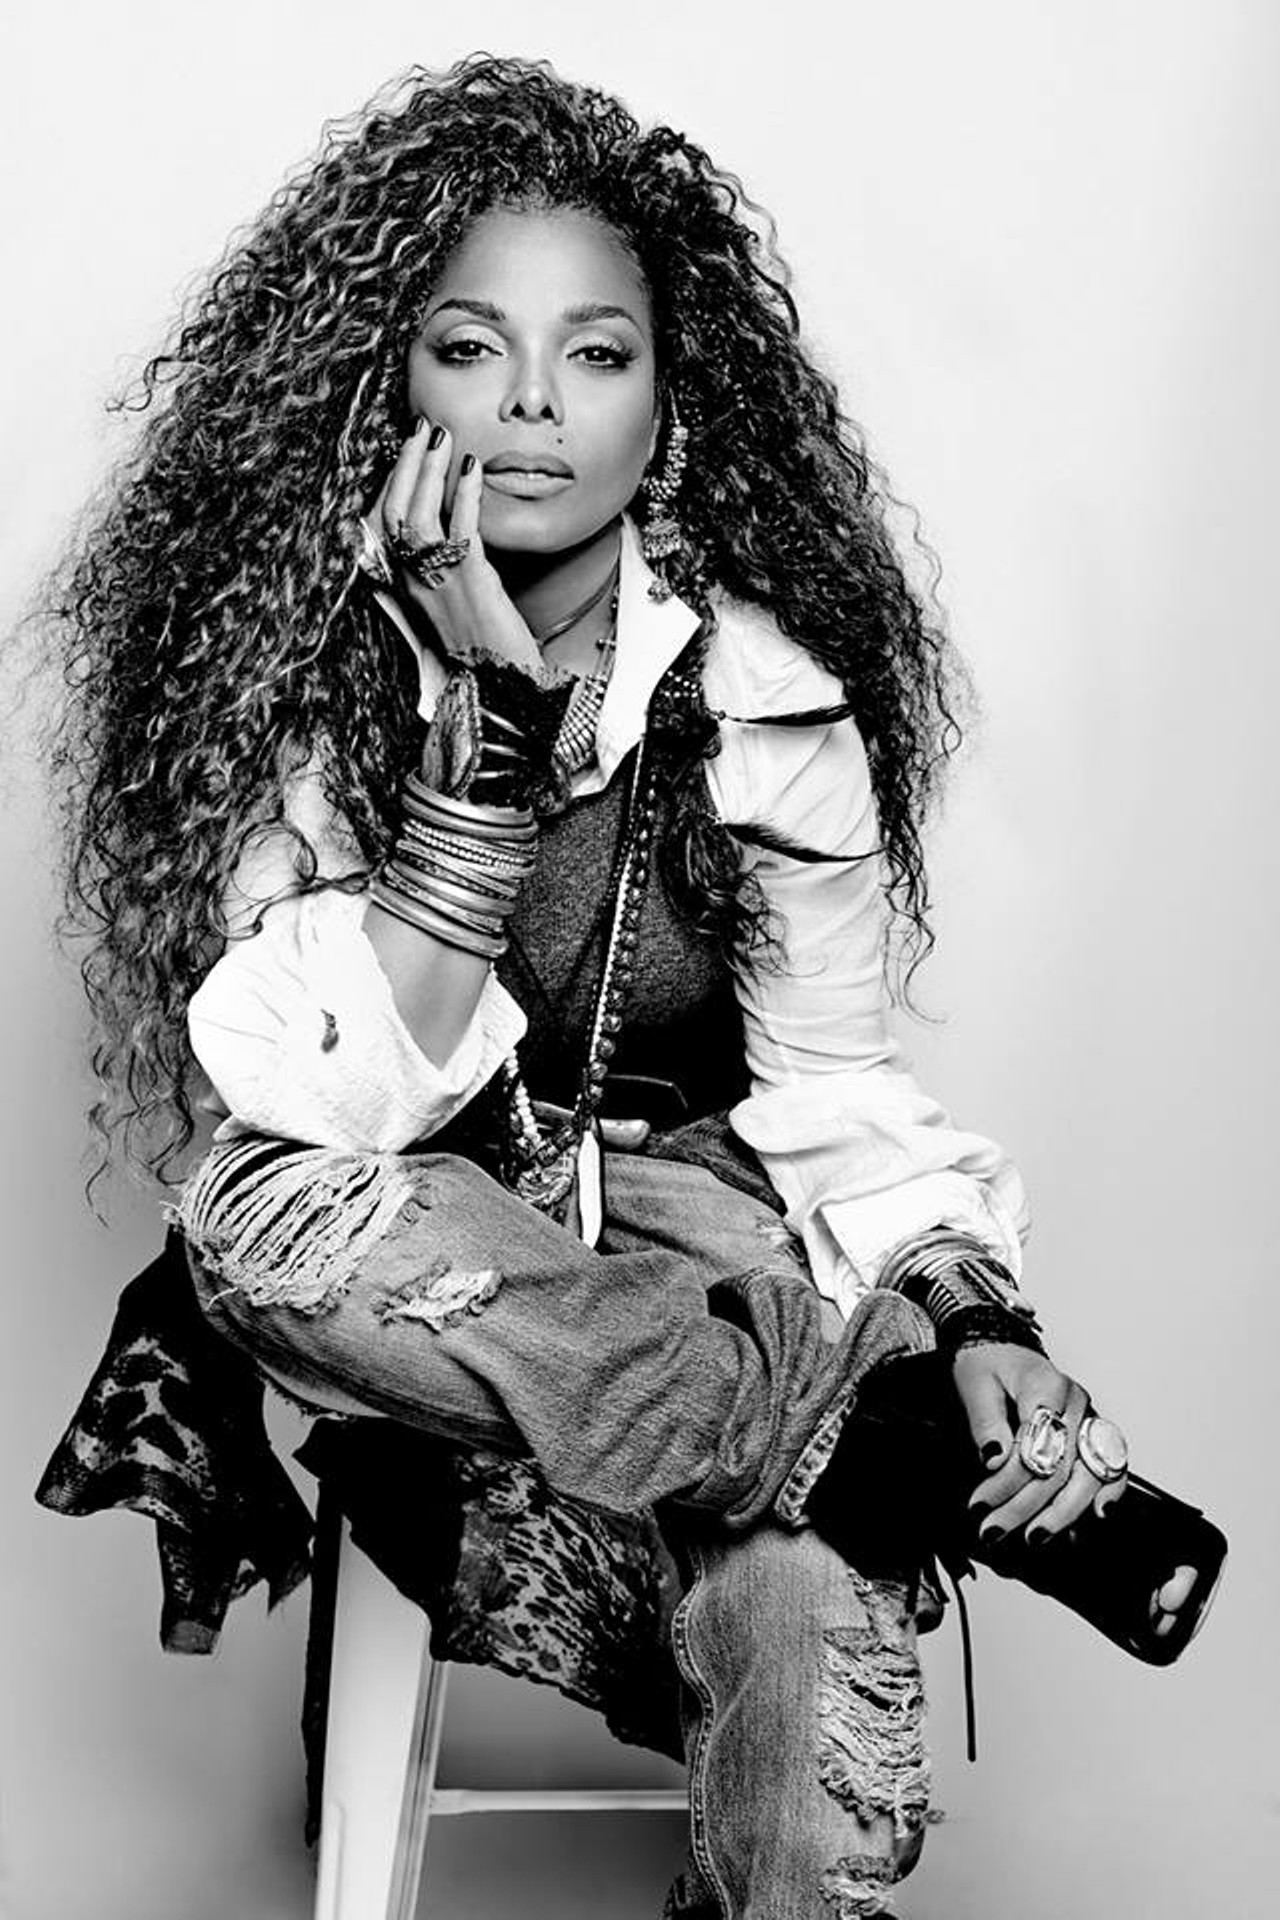 Janet Jackson will be making an appearance in Detroit. Her &#147;State of The World&#148; Tour has the pop icon performing in the Motor City on Oct. 29. The concert will be at the Little Caesars Arena, and the doors will open at 8:00 P.m. Tickets start at $34. Photo courtesy of Facebook.